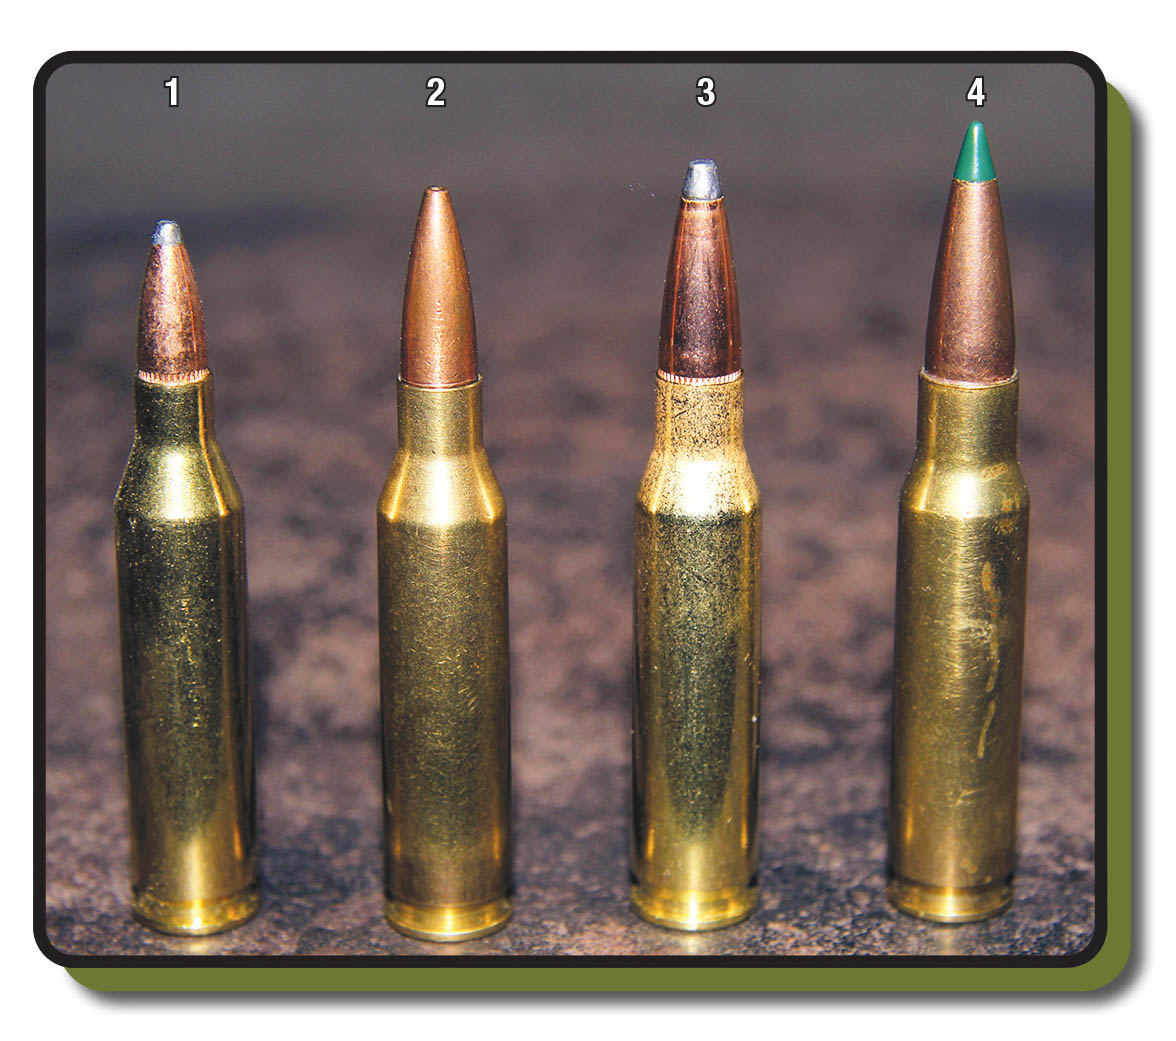 The (1) .243 Winchester is the smallest of the .308 Winchester-derived cartridges, including the (2) .260 Remington, (3) 7mm-08 Remington and (4) .308 Winchester.